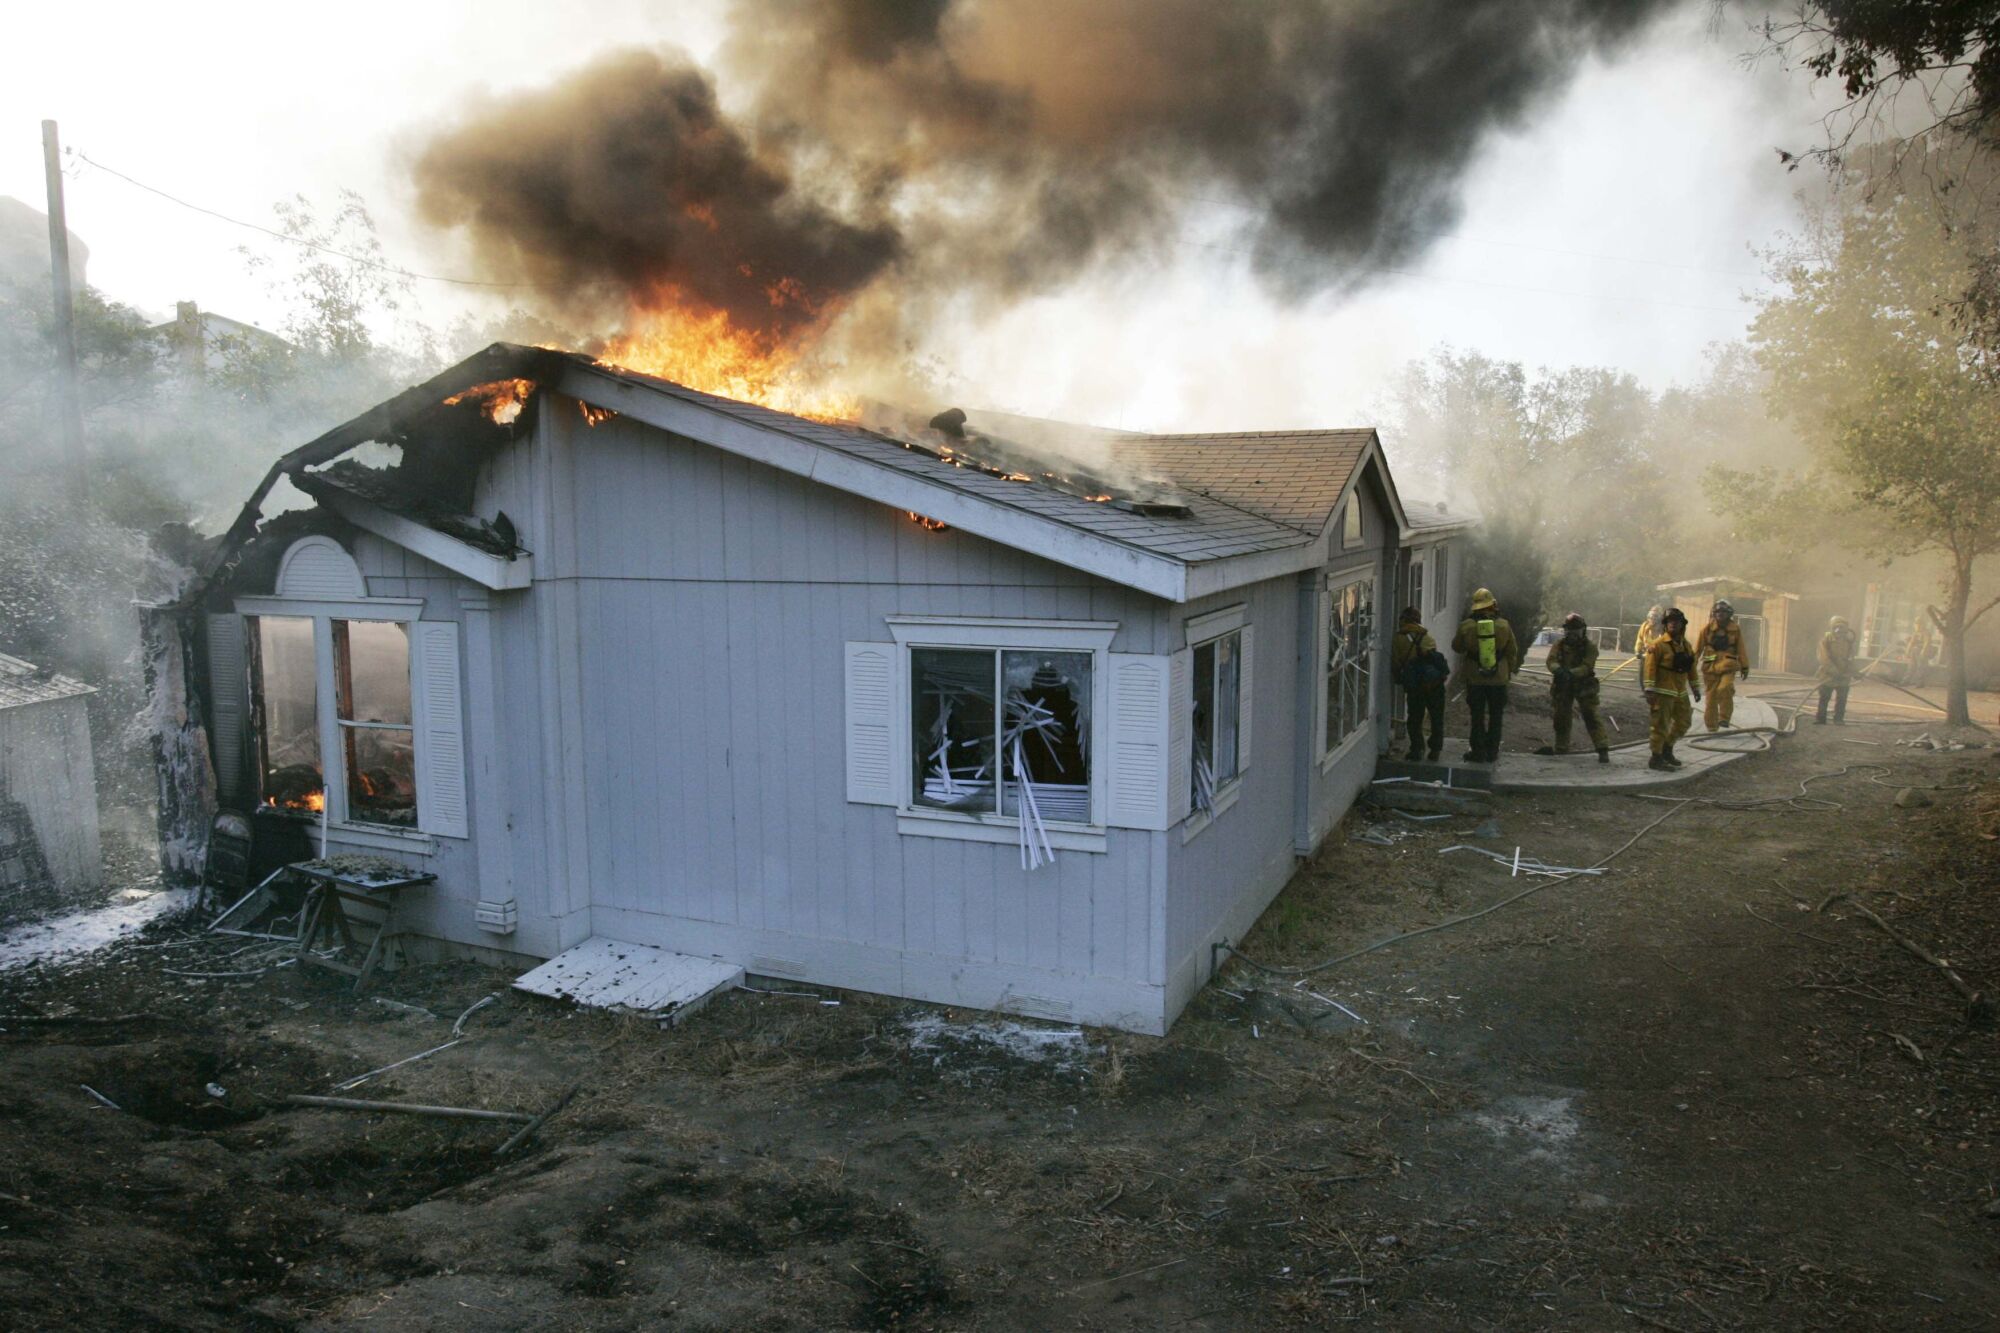 Firefighters battled a house fire at 2545 Honey Springs Road north of Dulzura during the Harris fire in 2007.